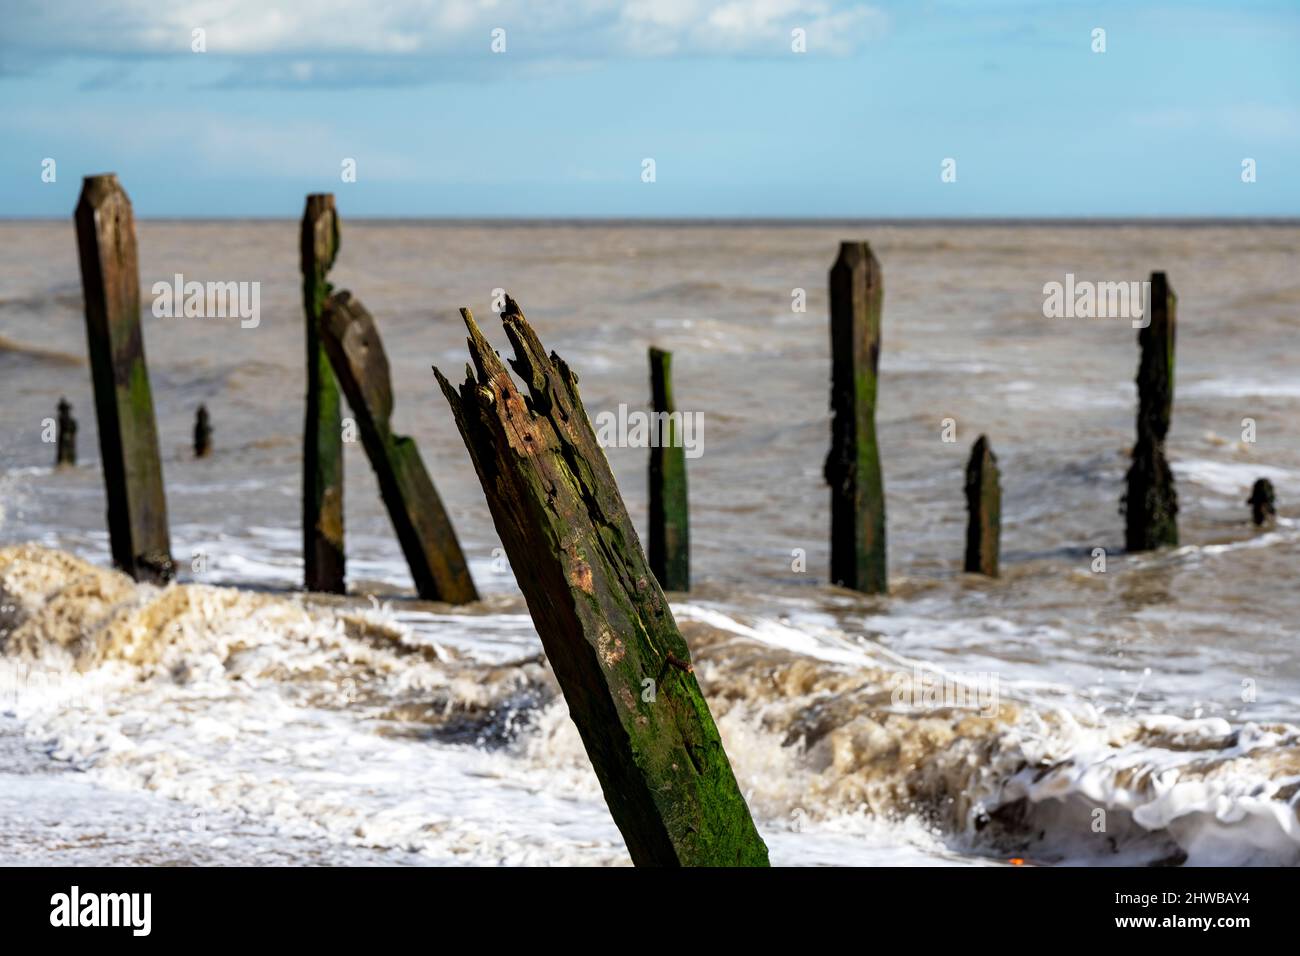 Oak groynes dating back over 140-years Bawdsey Ferry Suffolk England Stock Photo